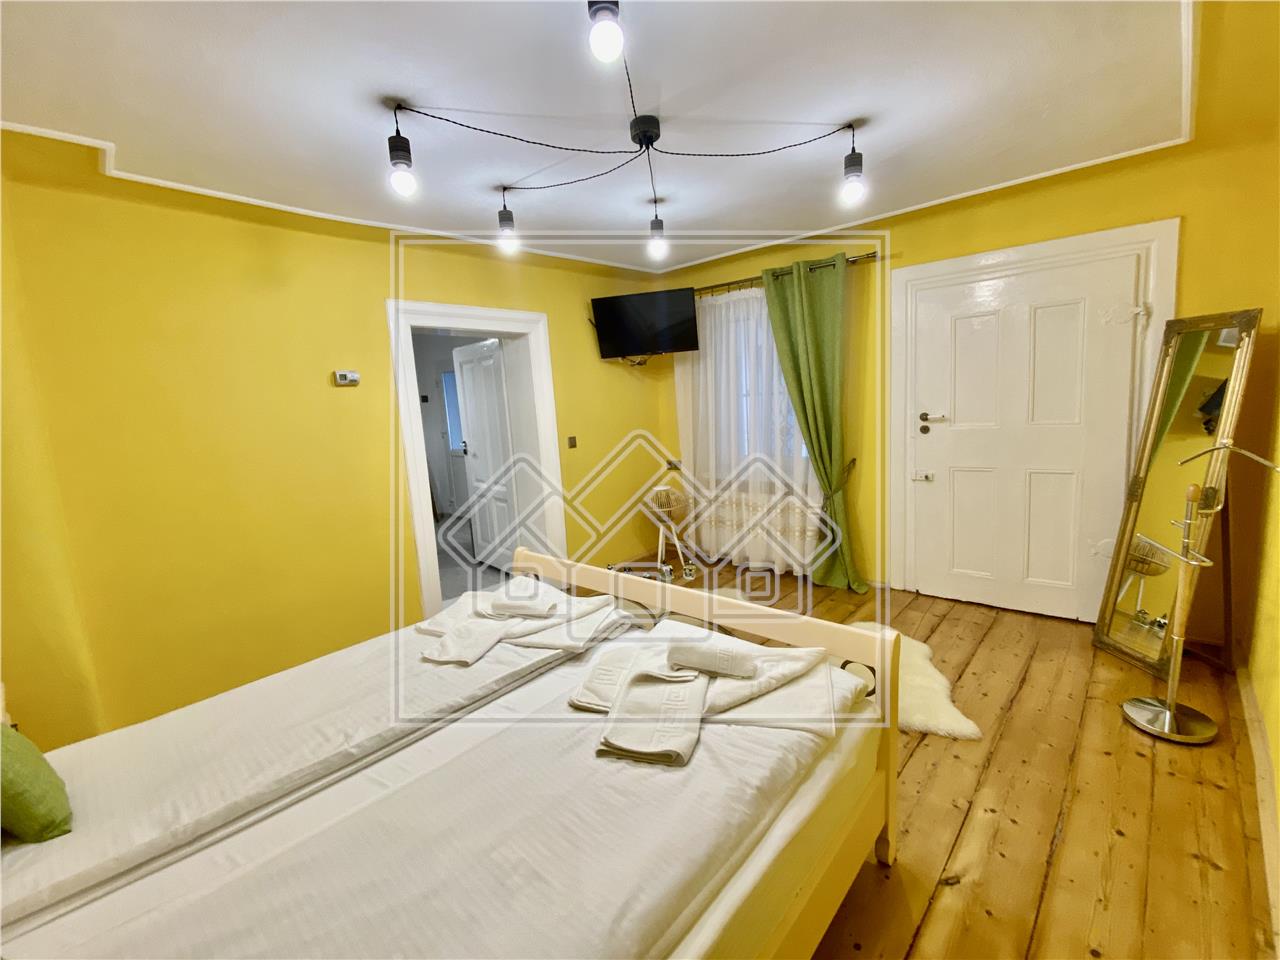 Studio for sale in Sibiu - ideal investment - Central area